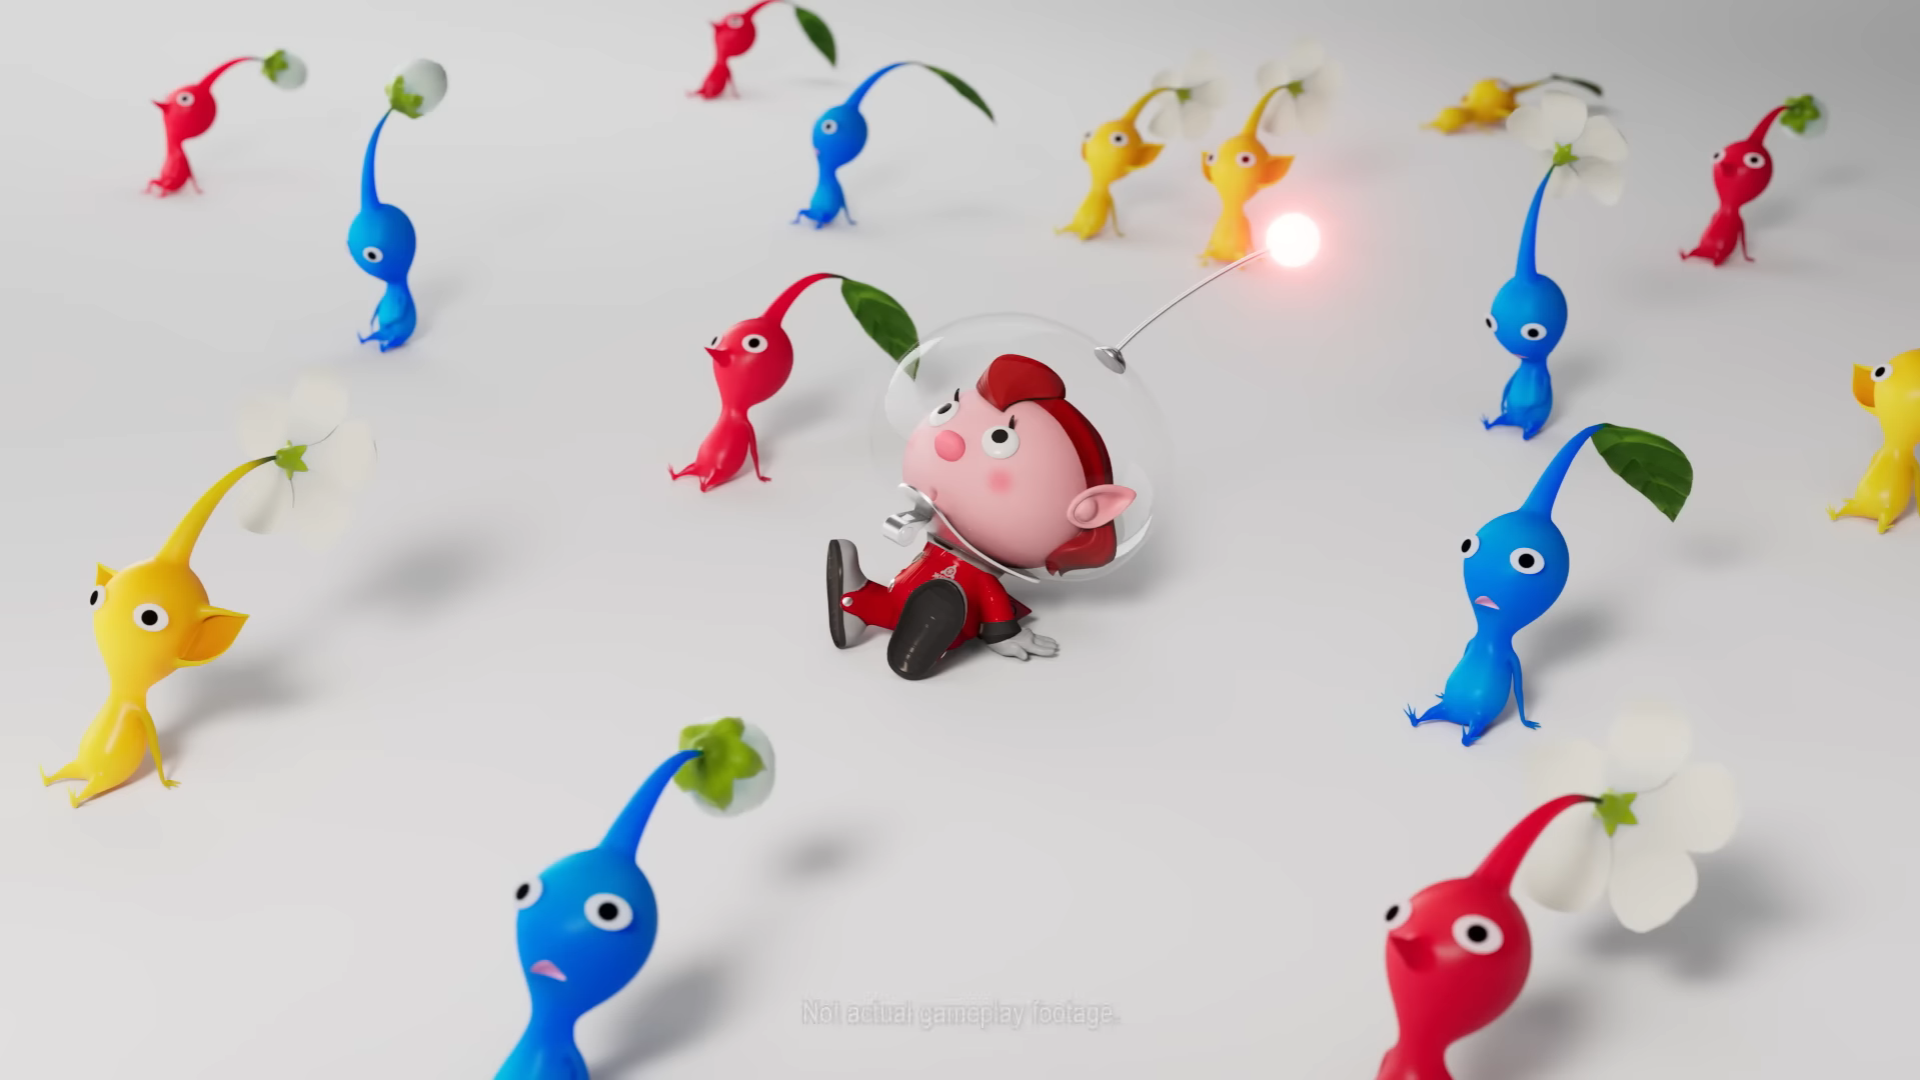 Pikmin 4 Team Discusses Mortality, Controls & Oatchi, the Space Dog